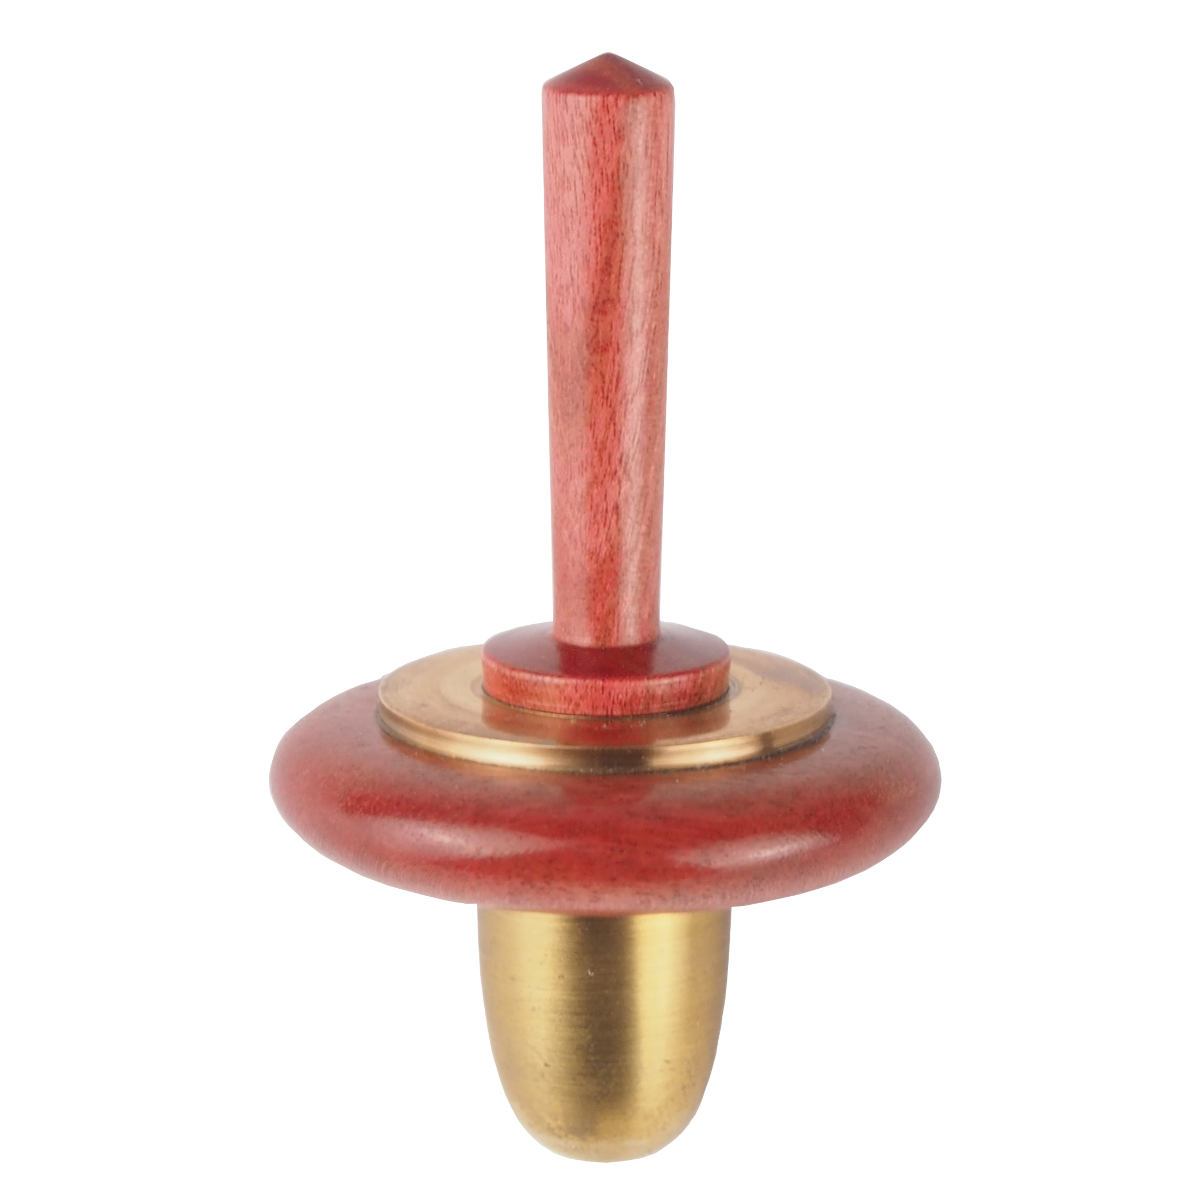 Artist's Spinning Top made of Pink Ivory and Brass